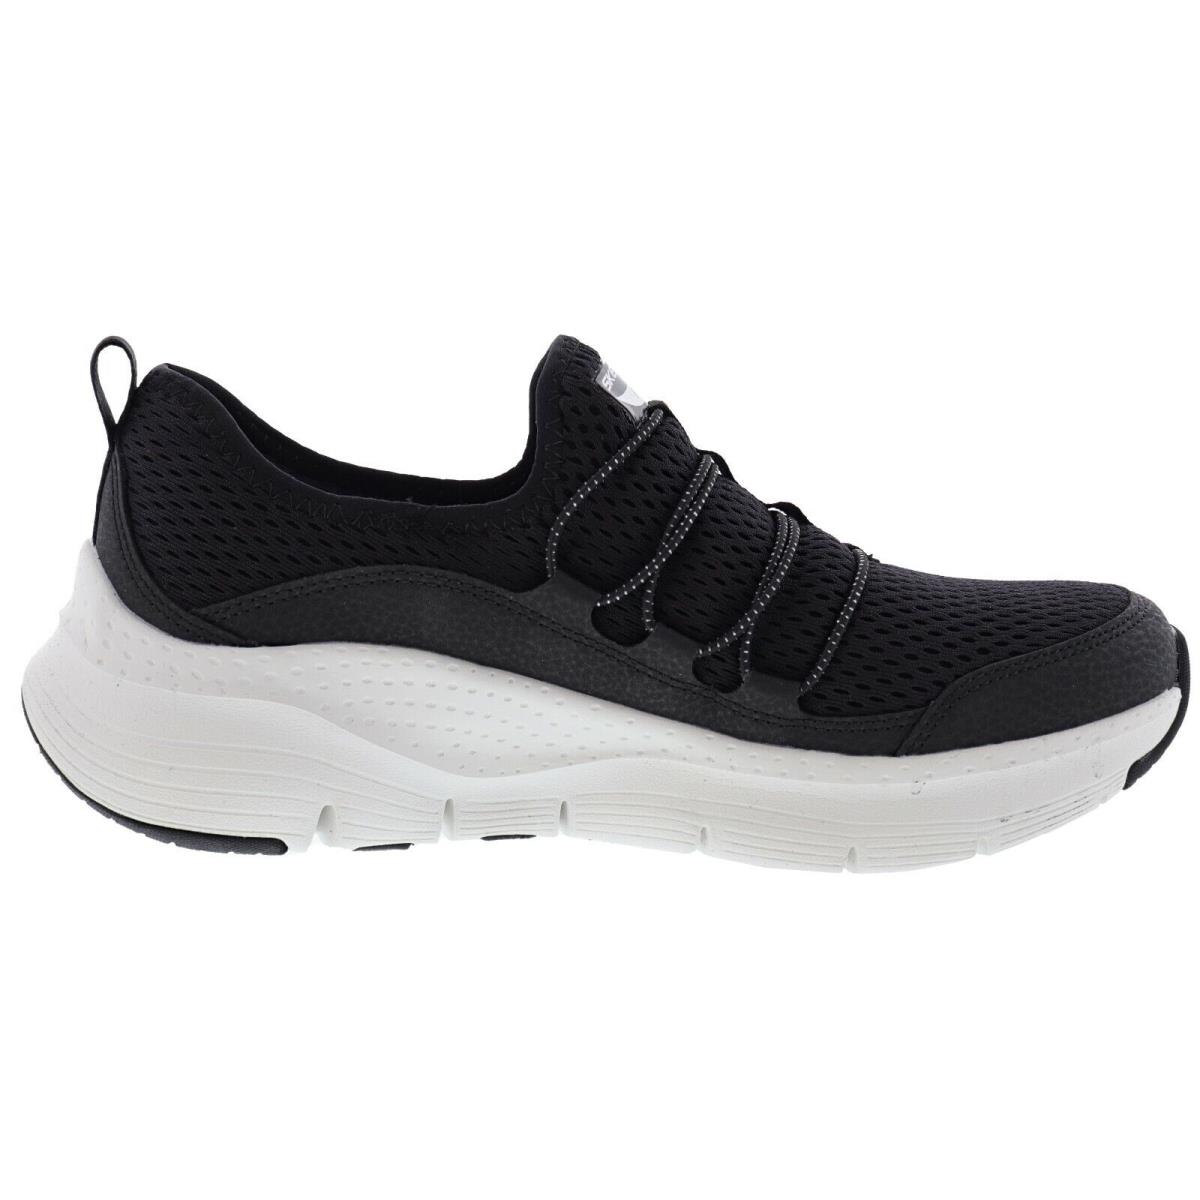 Skechers shoes ARCH LUCKY THOUGHTS - BLACK / WHITE 0